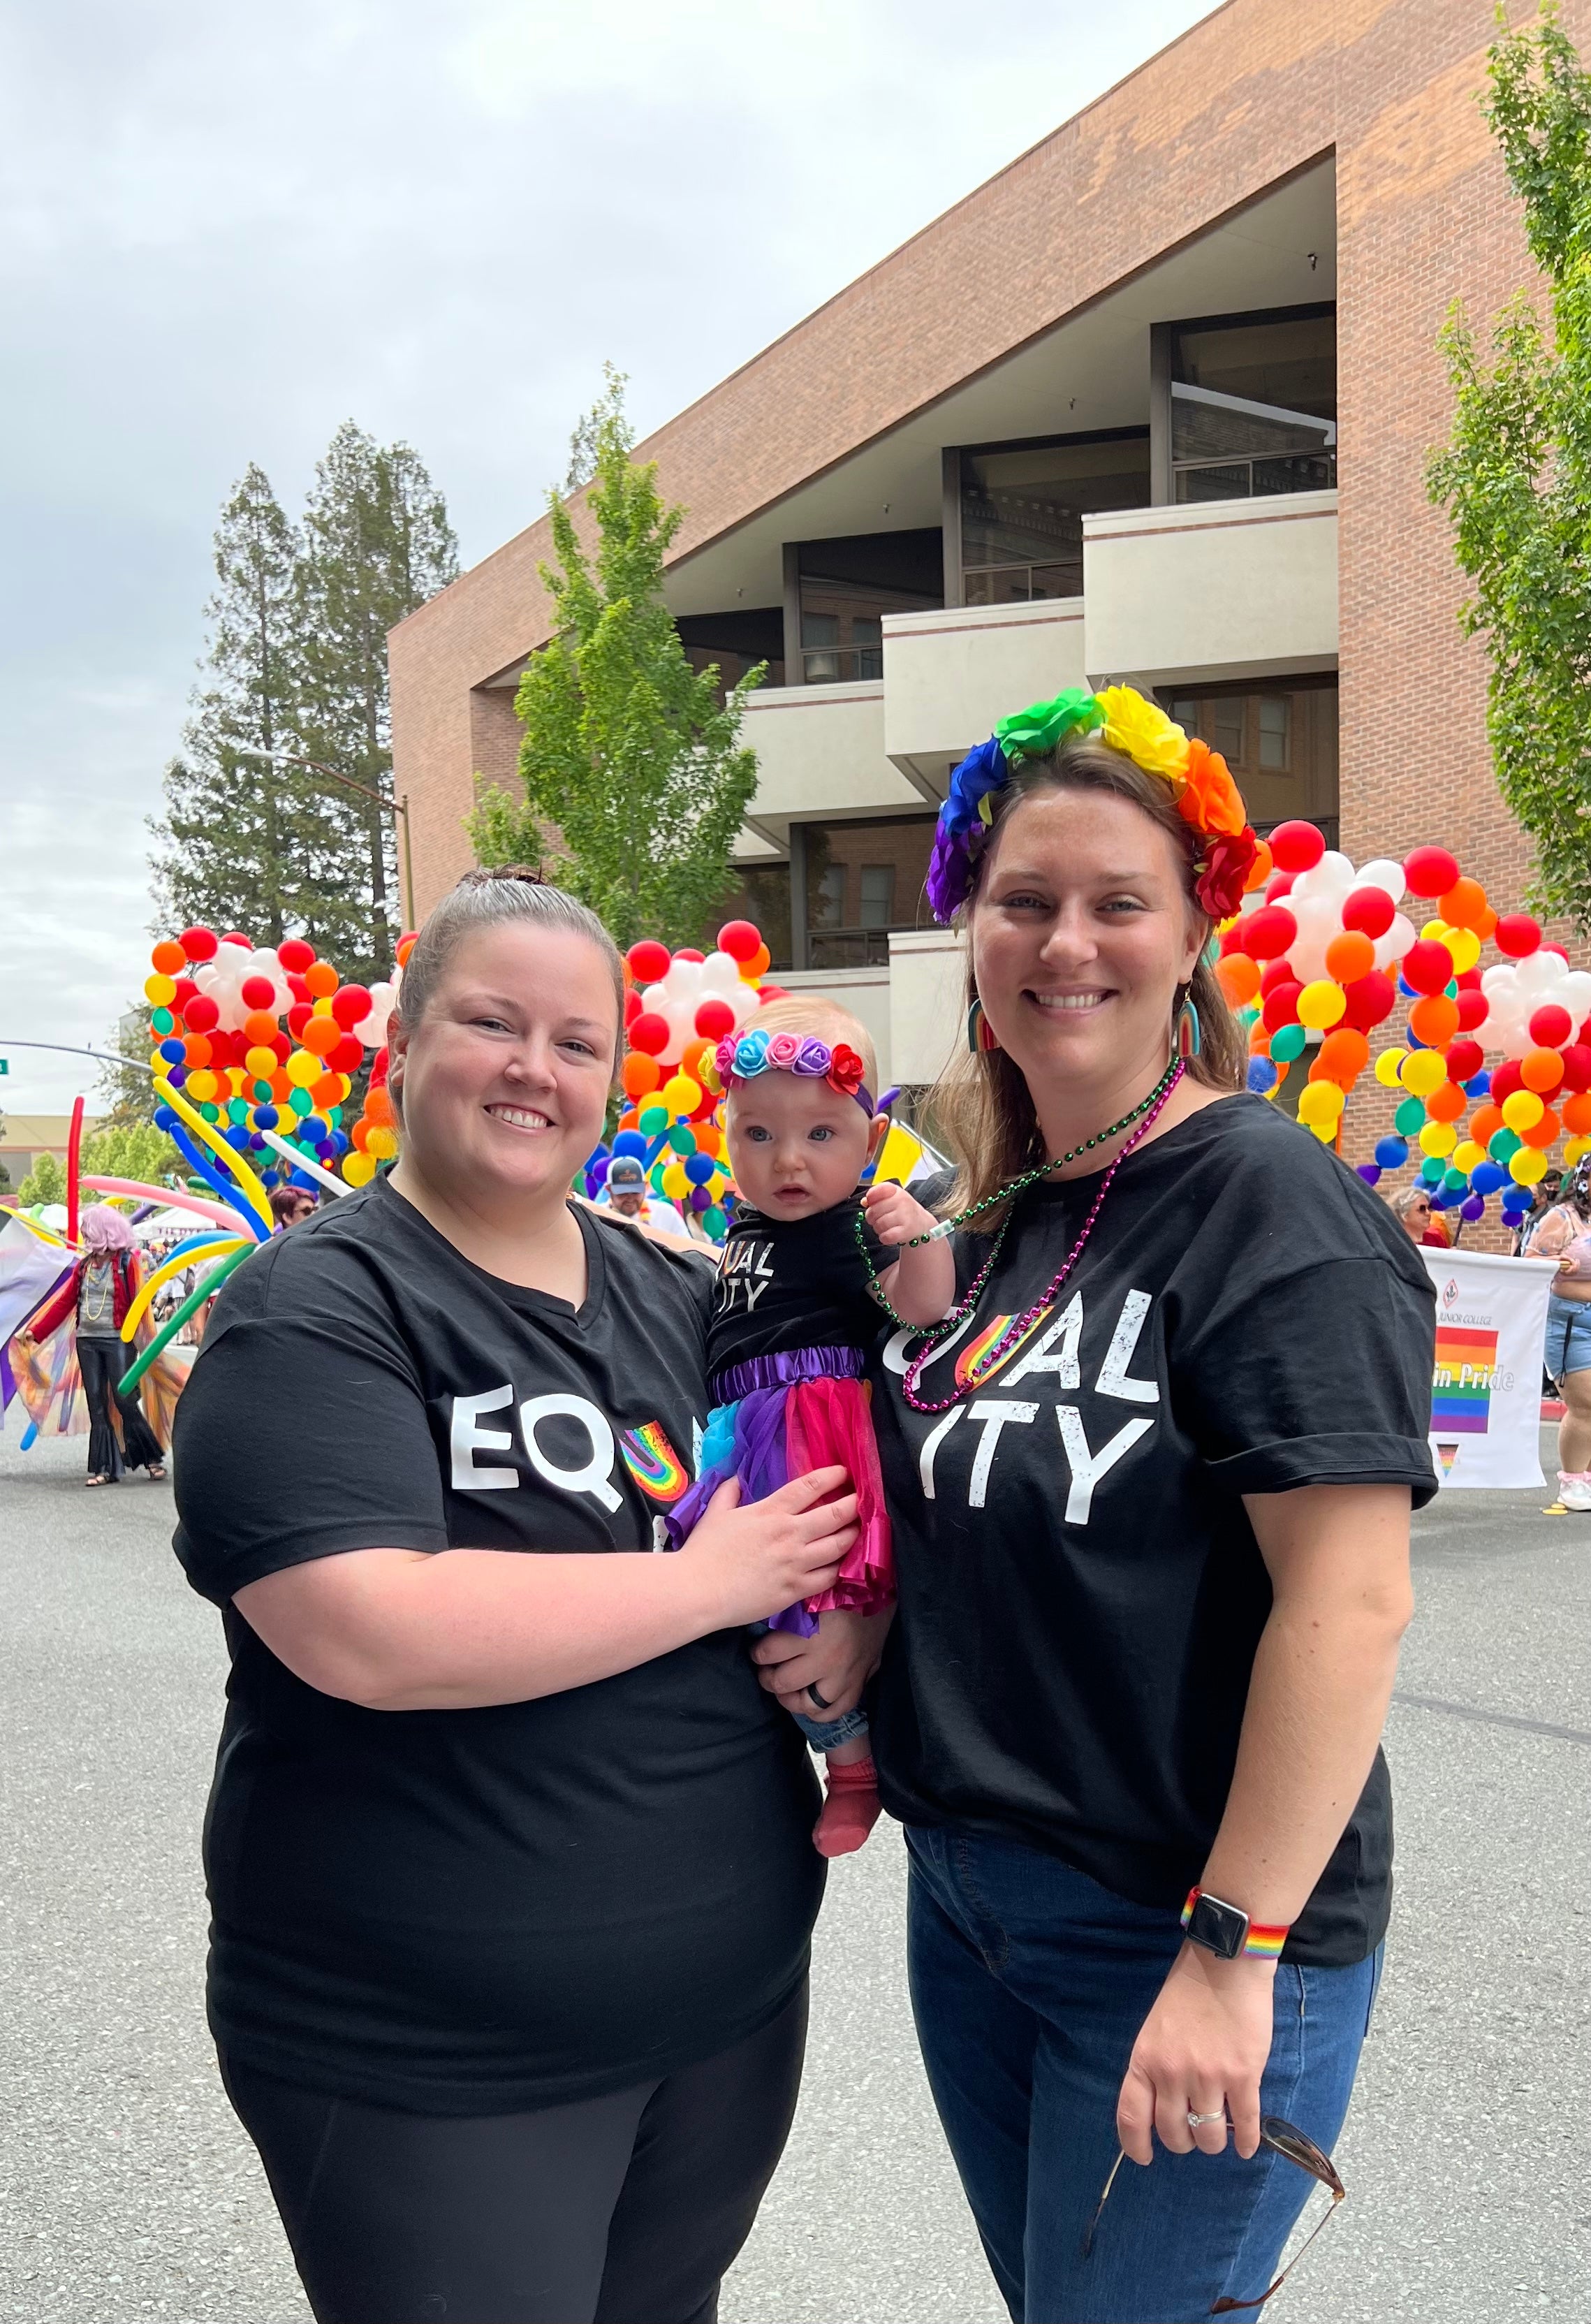 Kim stands next to another woman holding a baby, rainbow balloons and banners are in the background